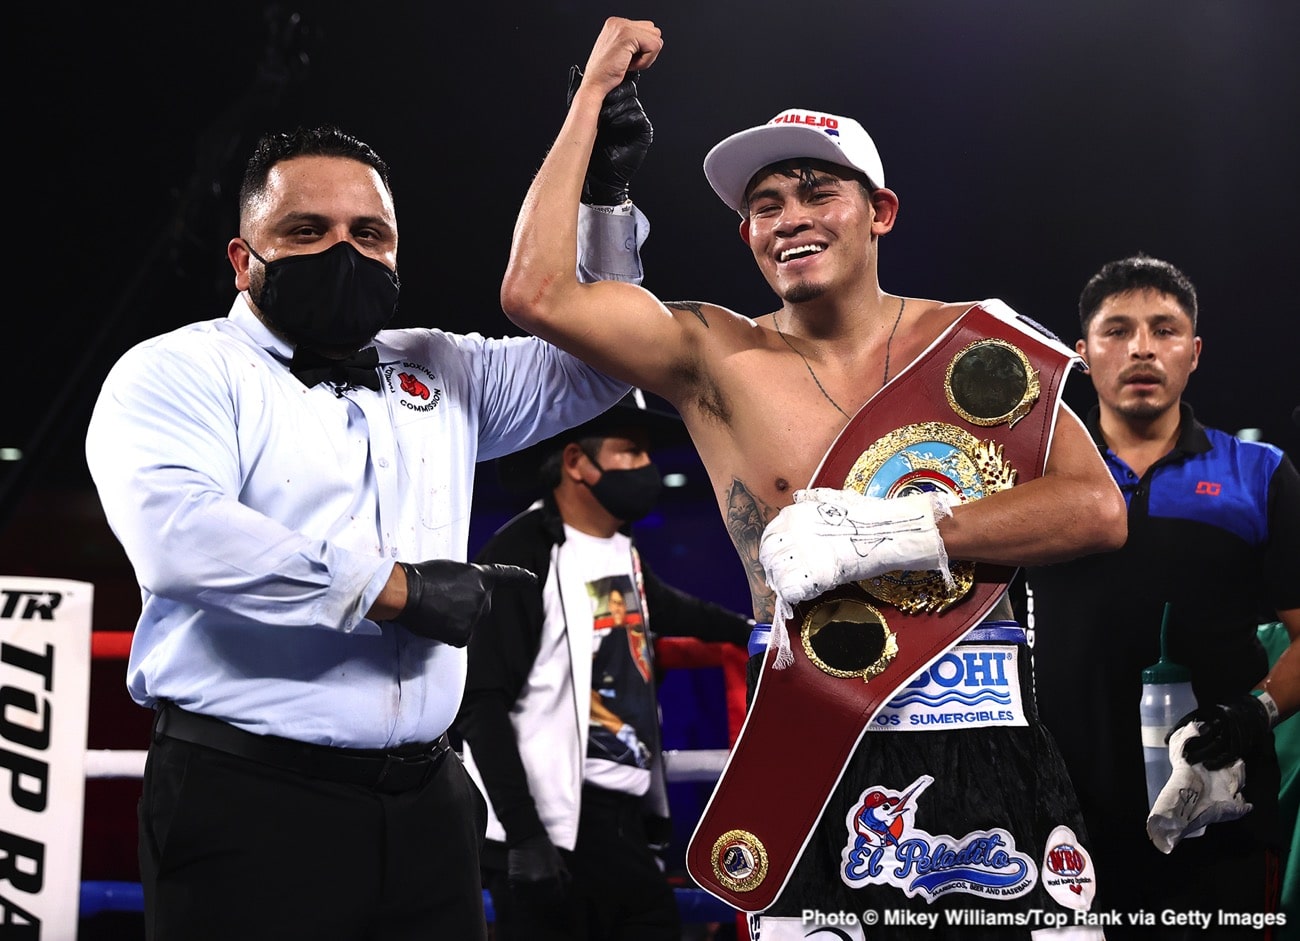 Emanuel Navarrete had too much power for Christopher Diaz